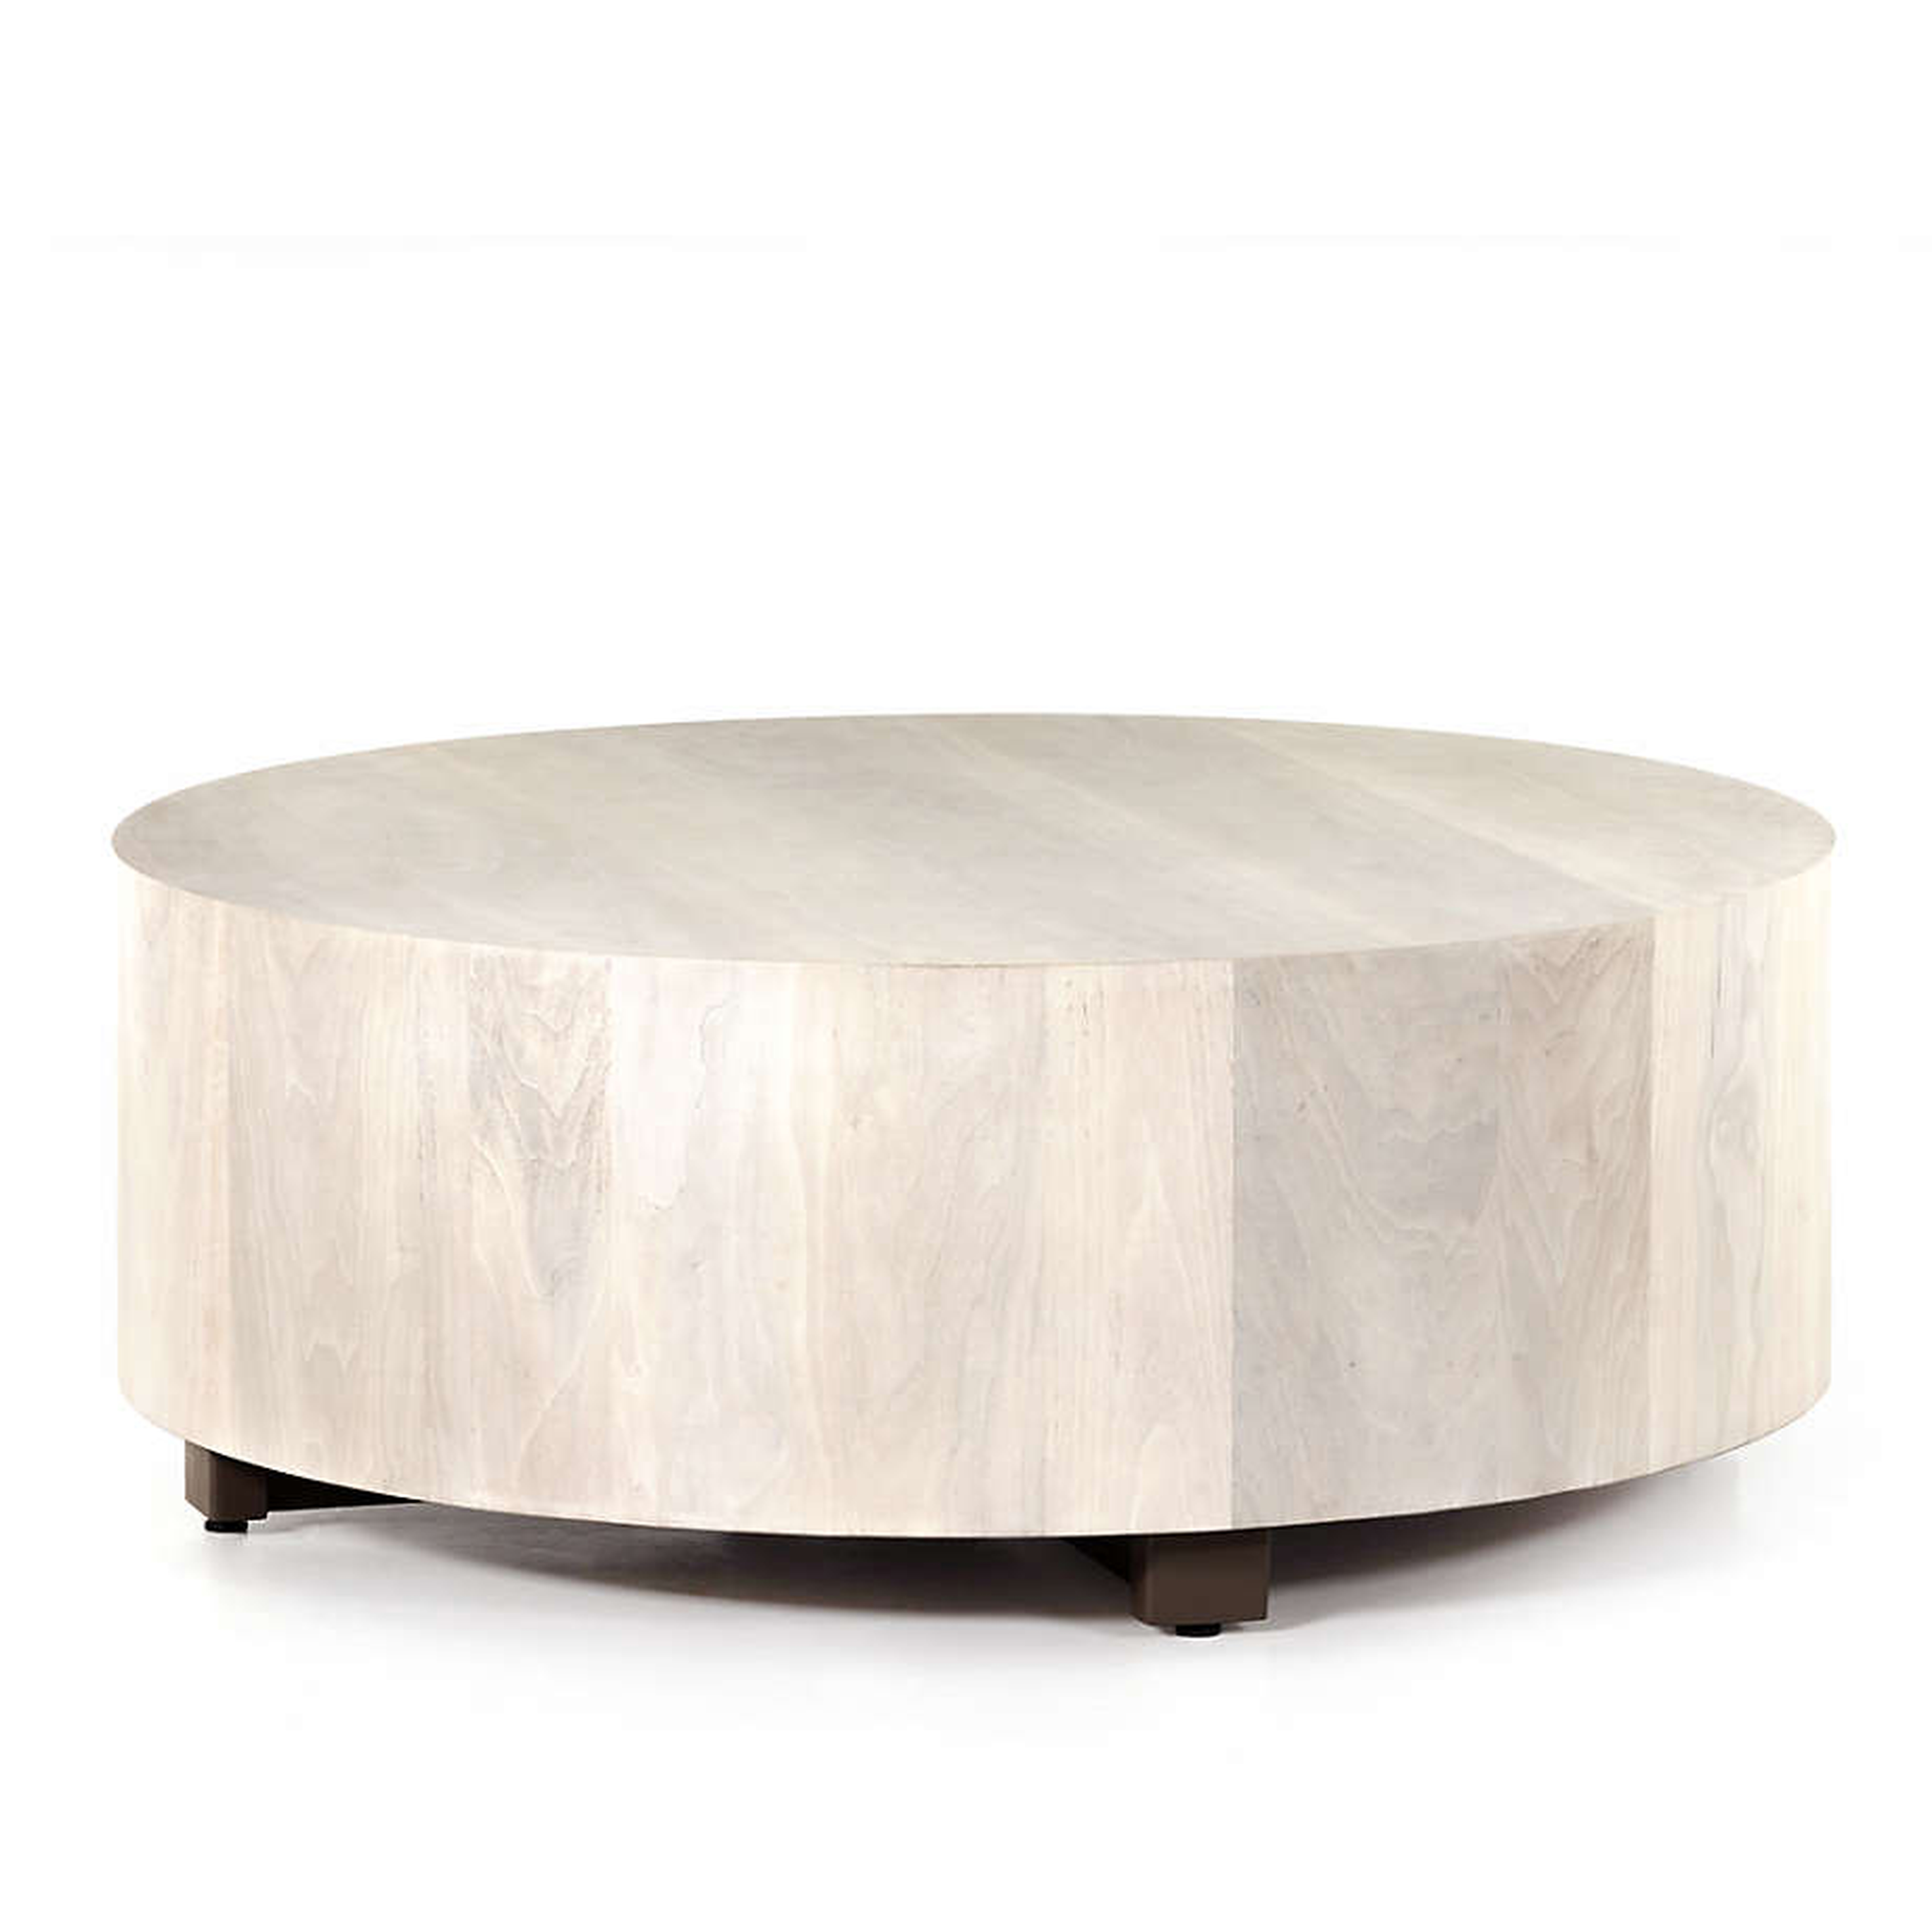 Dillon Ashen Walnut Wood 40" Round Coffee Table - Crate and Barrel